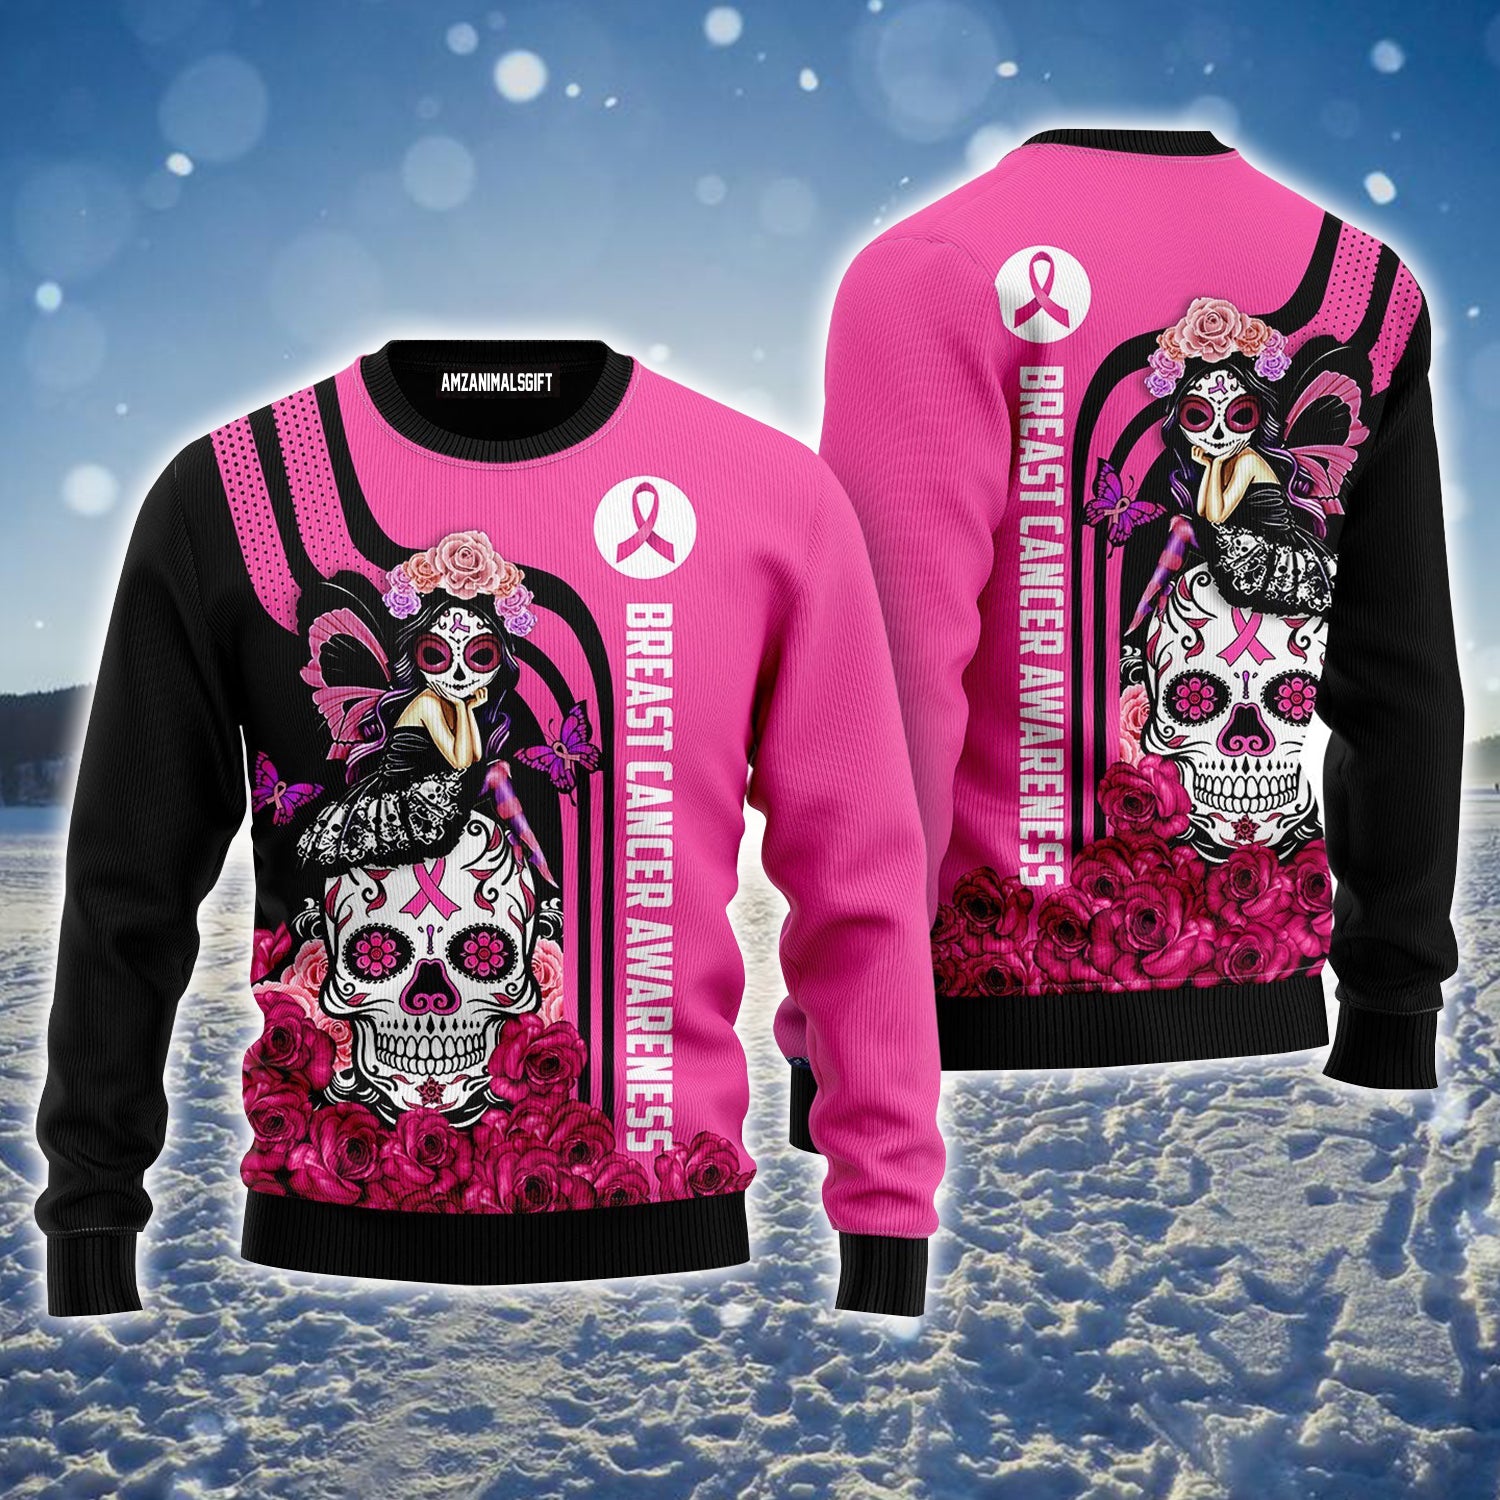 Breast Cancer Awareness Ugly Sweater, Skull Ugly Sweater, Butterfly Girl Ugly Sweater For Men & Women - Perfect Gift For Christmas, Family, Friends